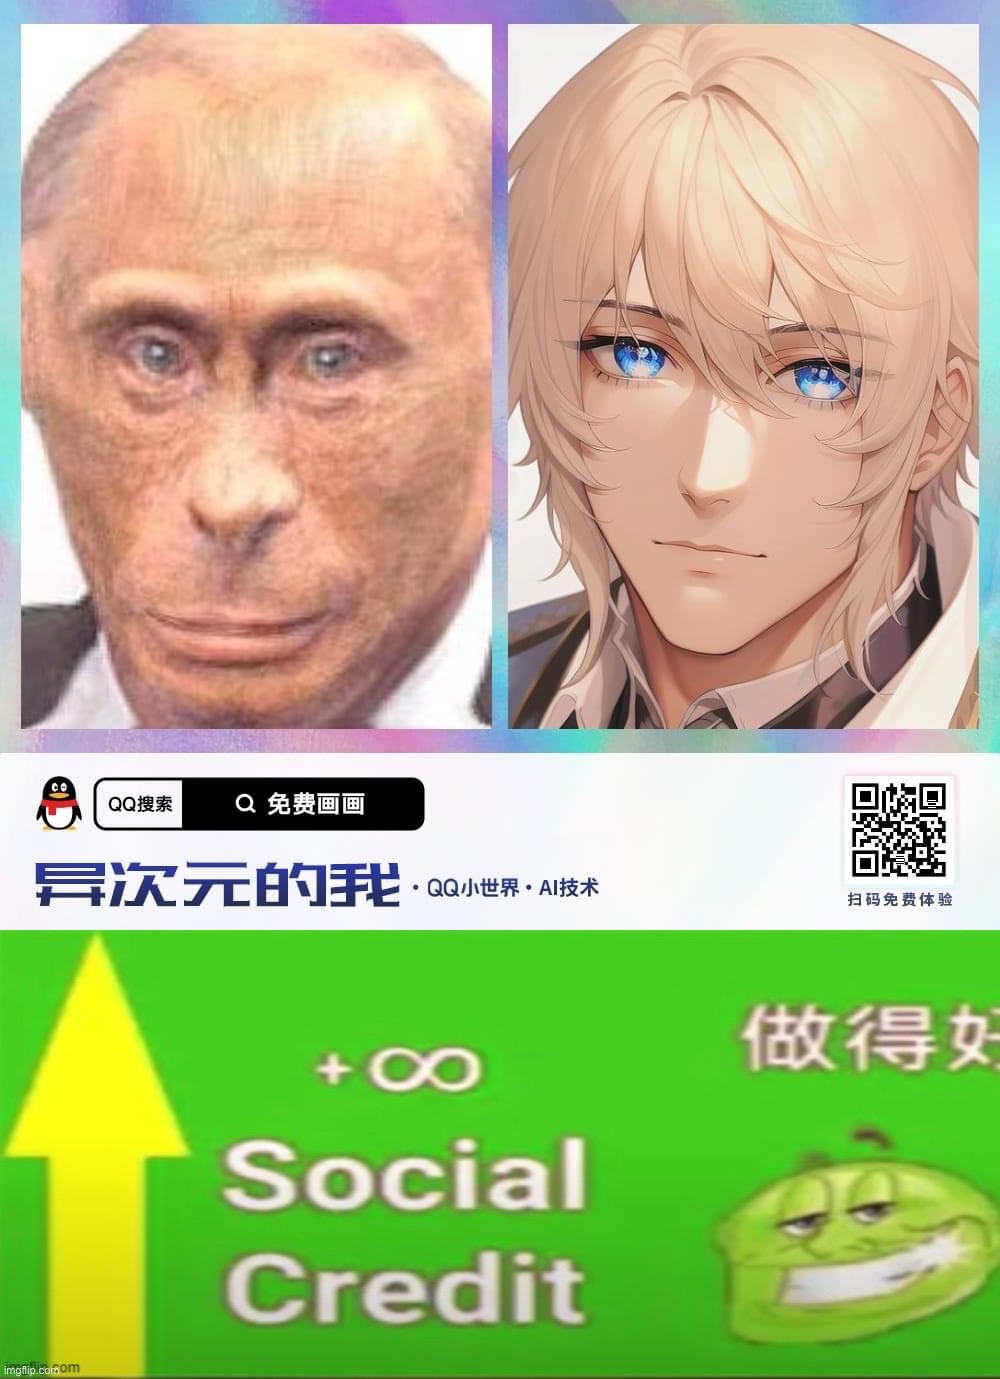 How the degenerate West see Mr. Putin vs. How Russian & Chinese know him by heart <3 #Freedomphobia | image tagged in vladimir putin banan man anime,social credit,vladimir putin,putin,banan man,freedomphobia | made w/ Imgflip meme maker